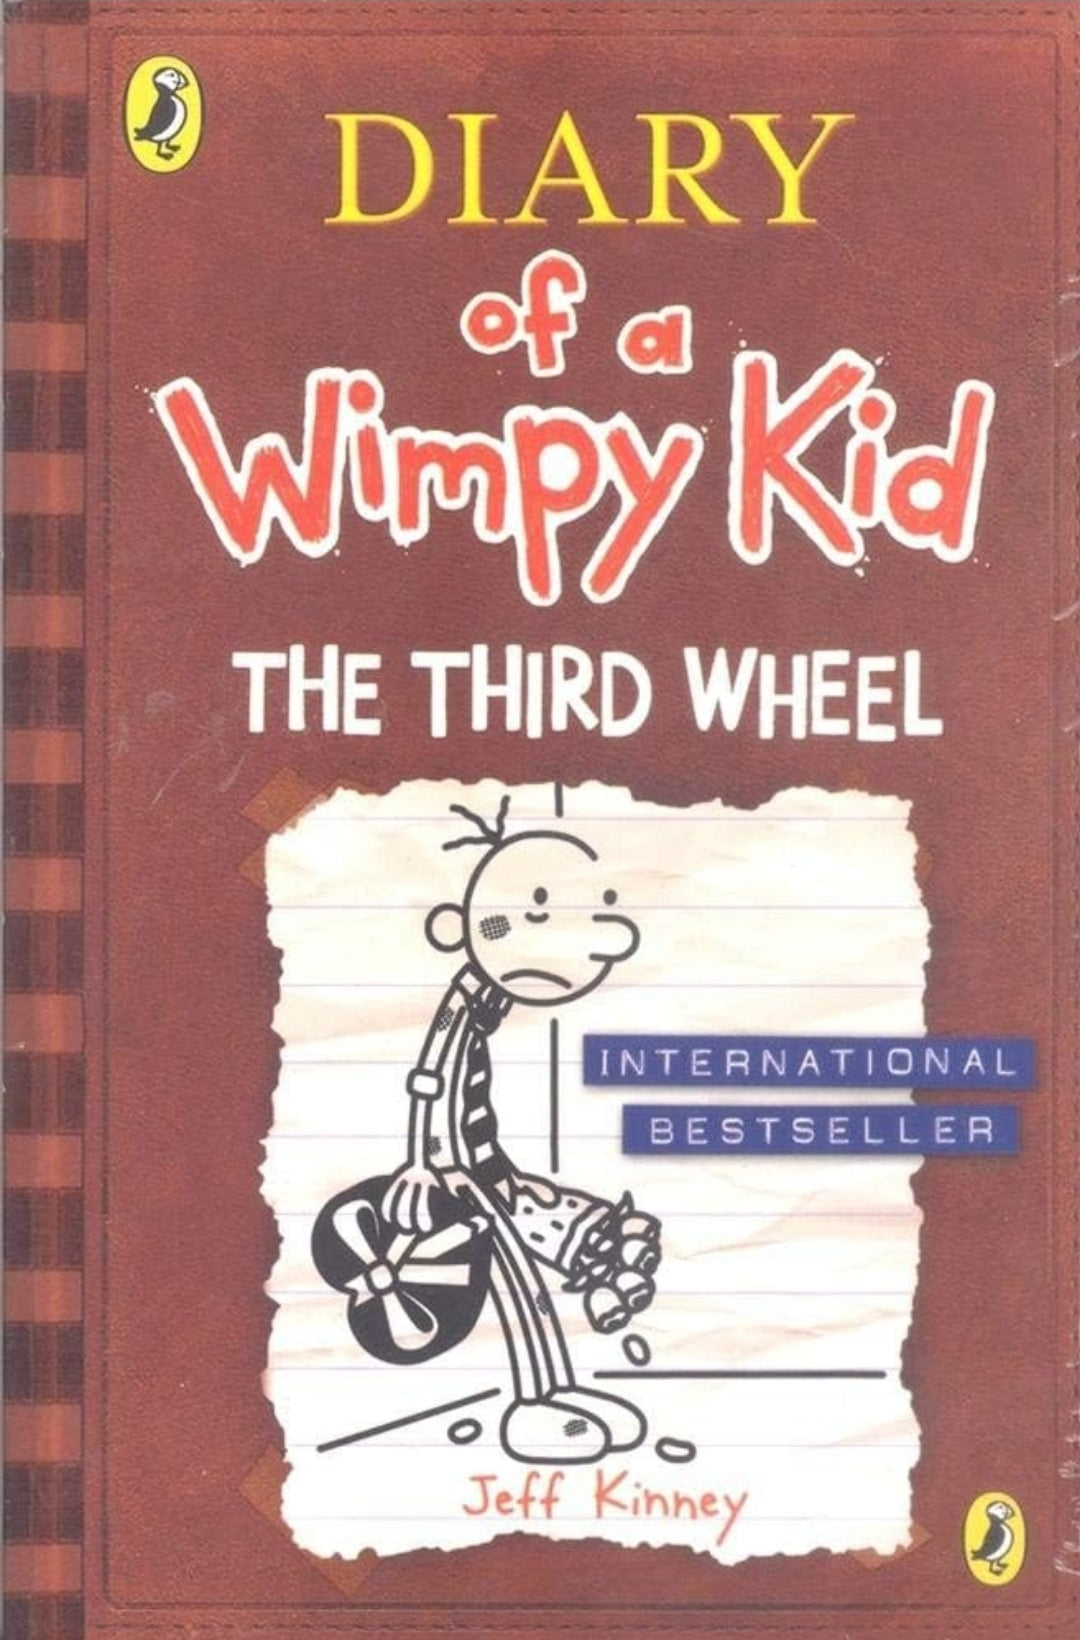 Diary of a Wimpy Kid: No Brainer by Jeff Kinney